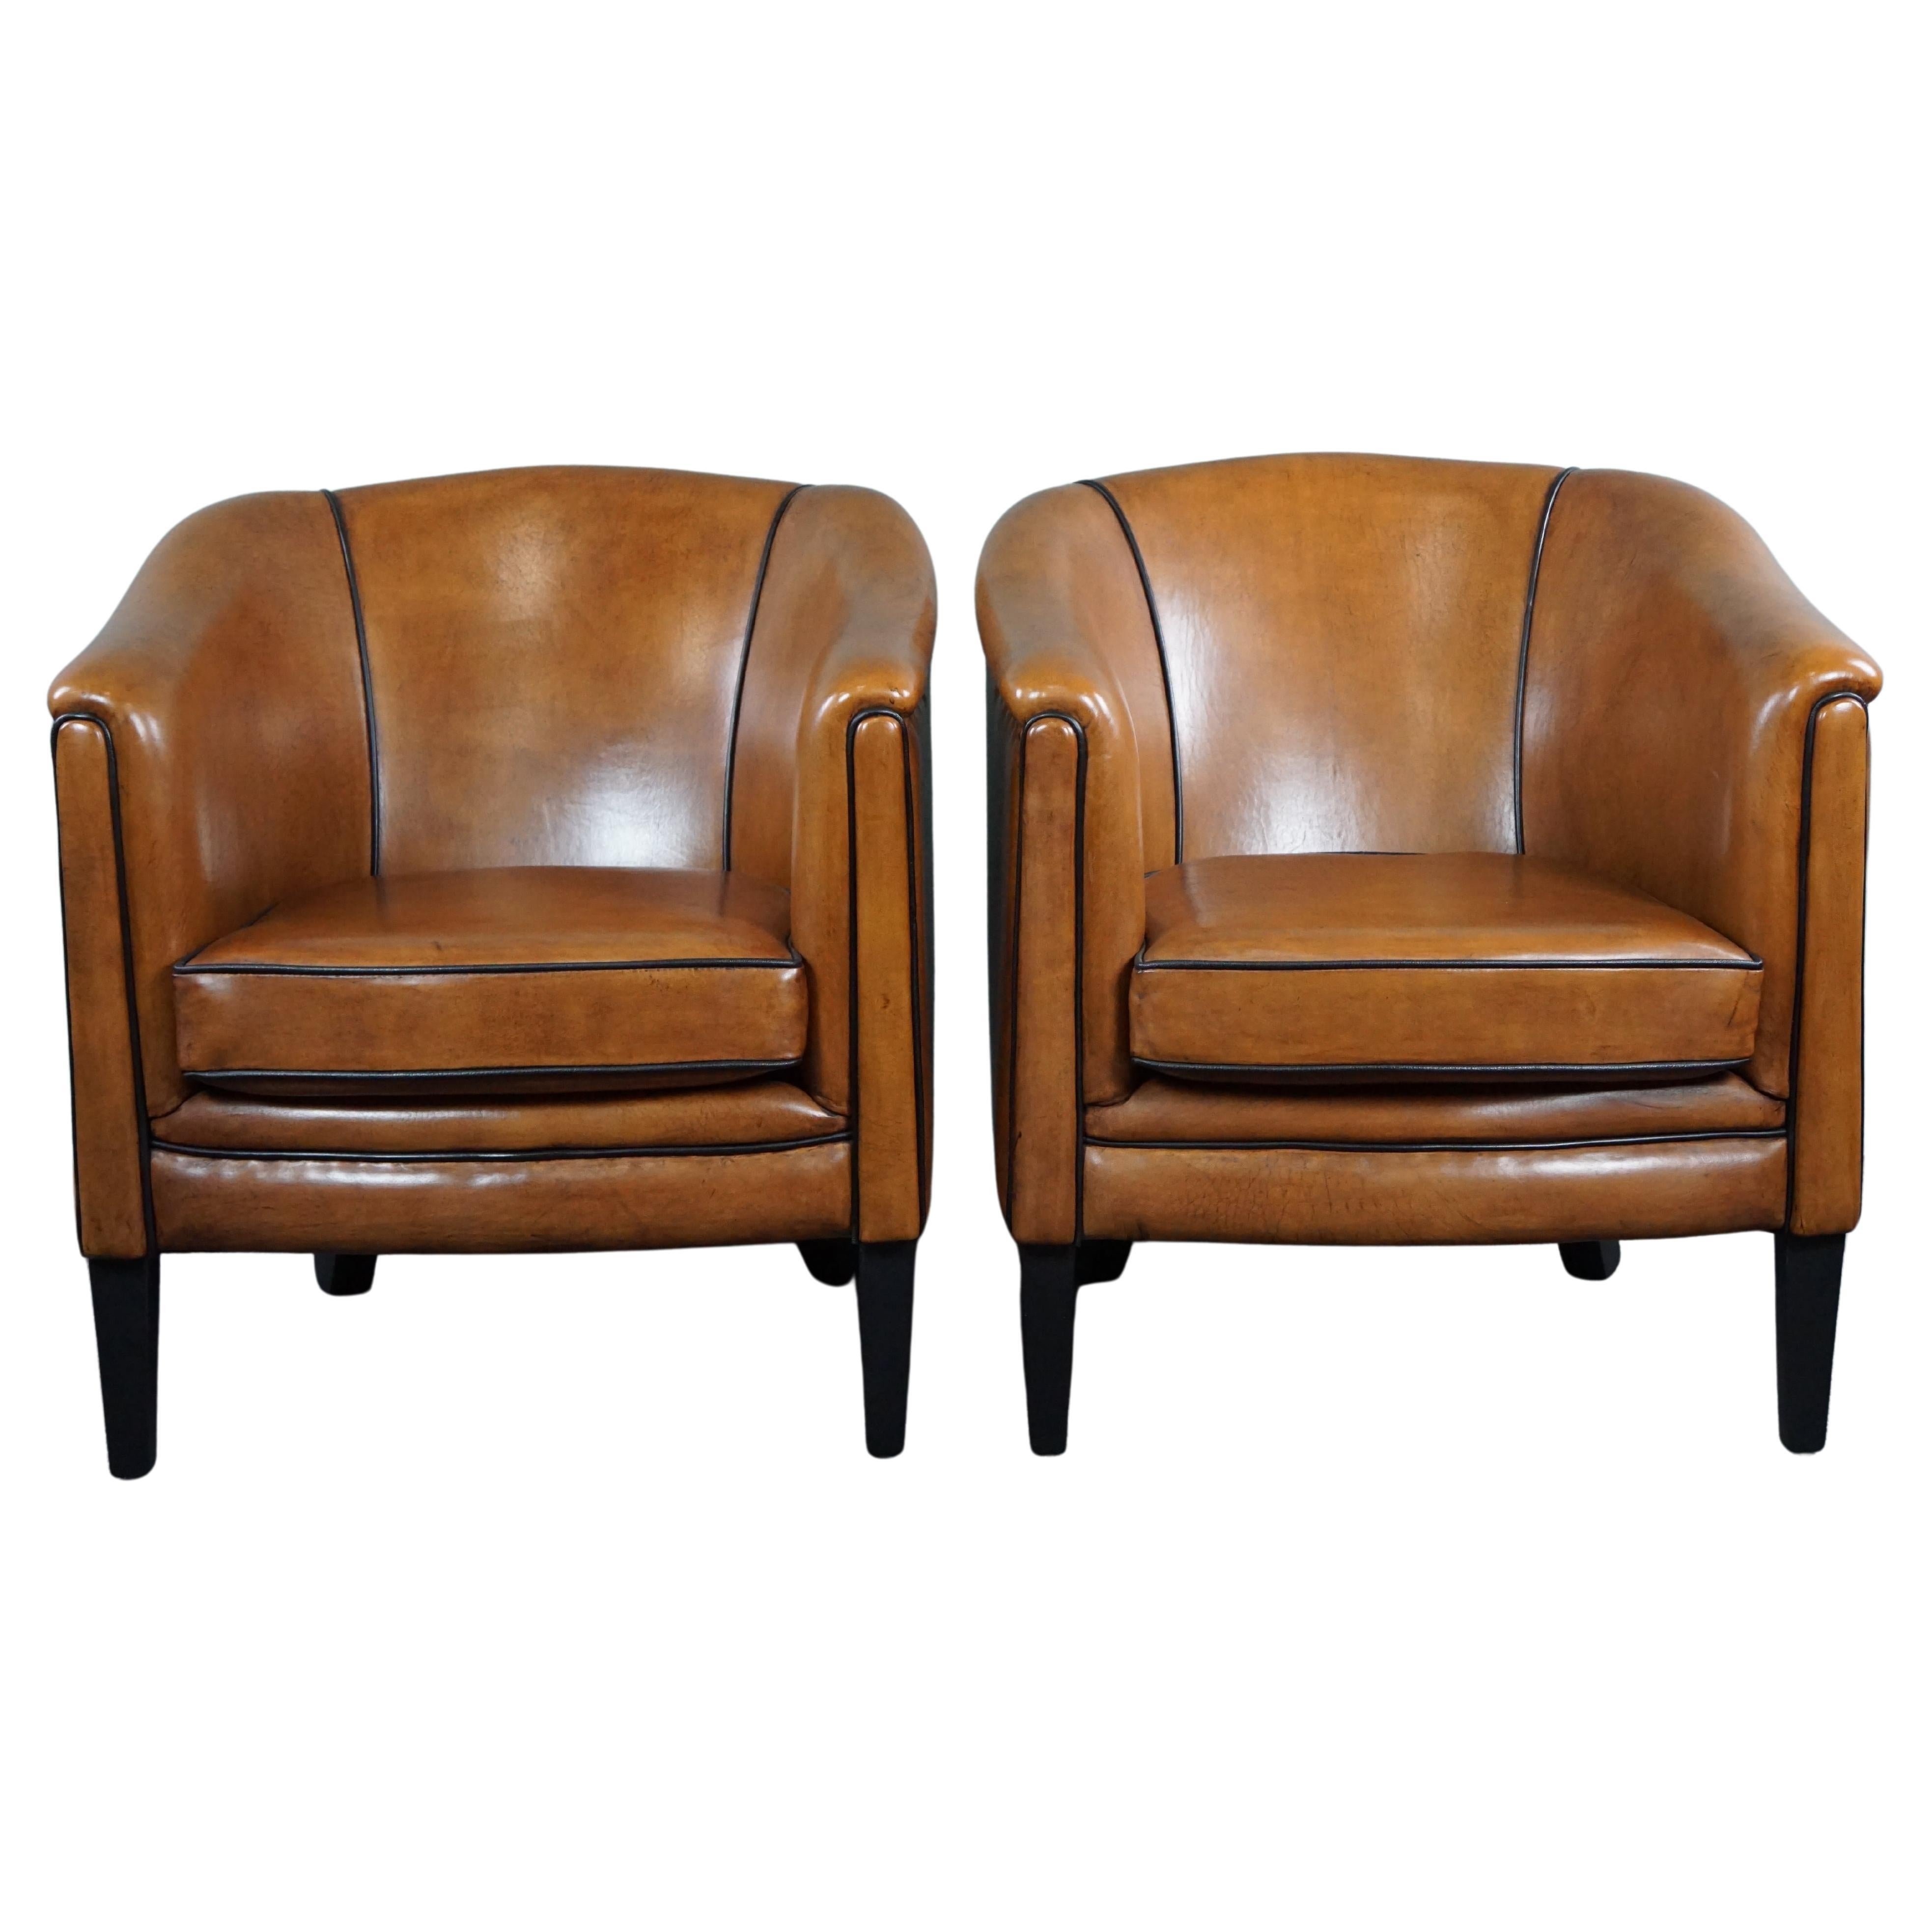 New set of two sheep leather armchairs with black piping